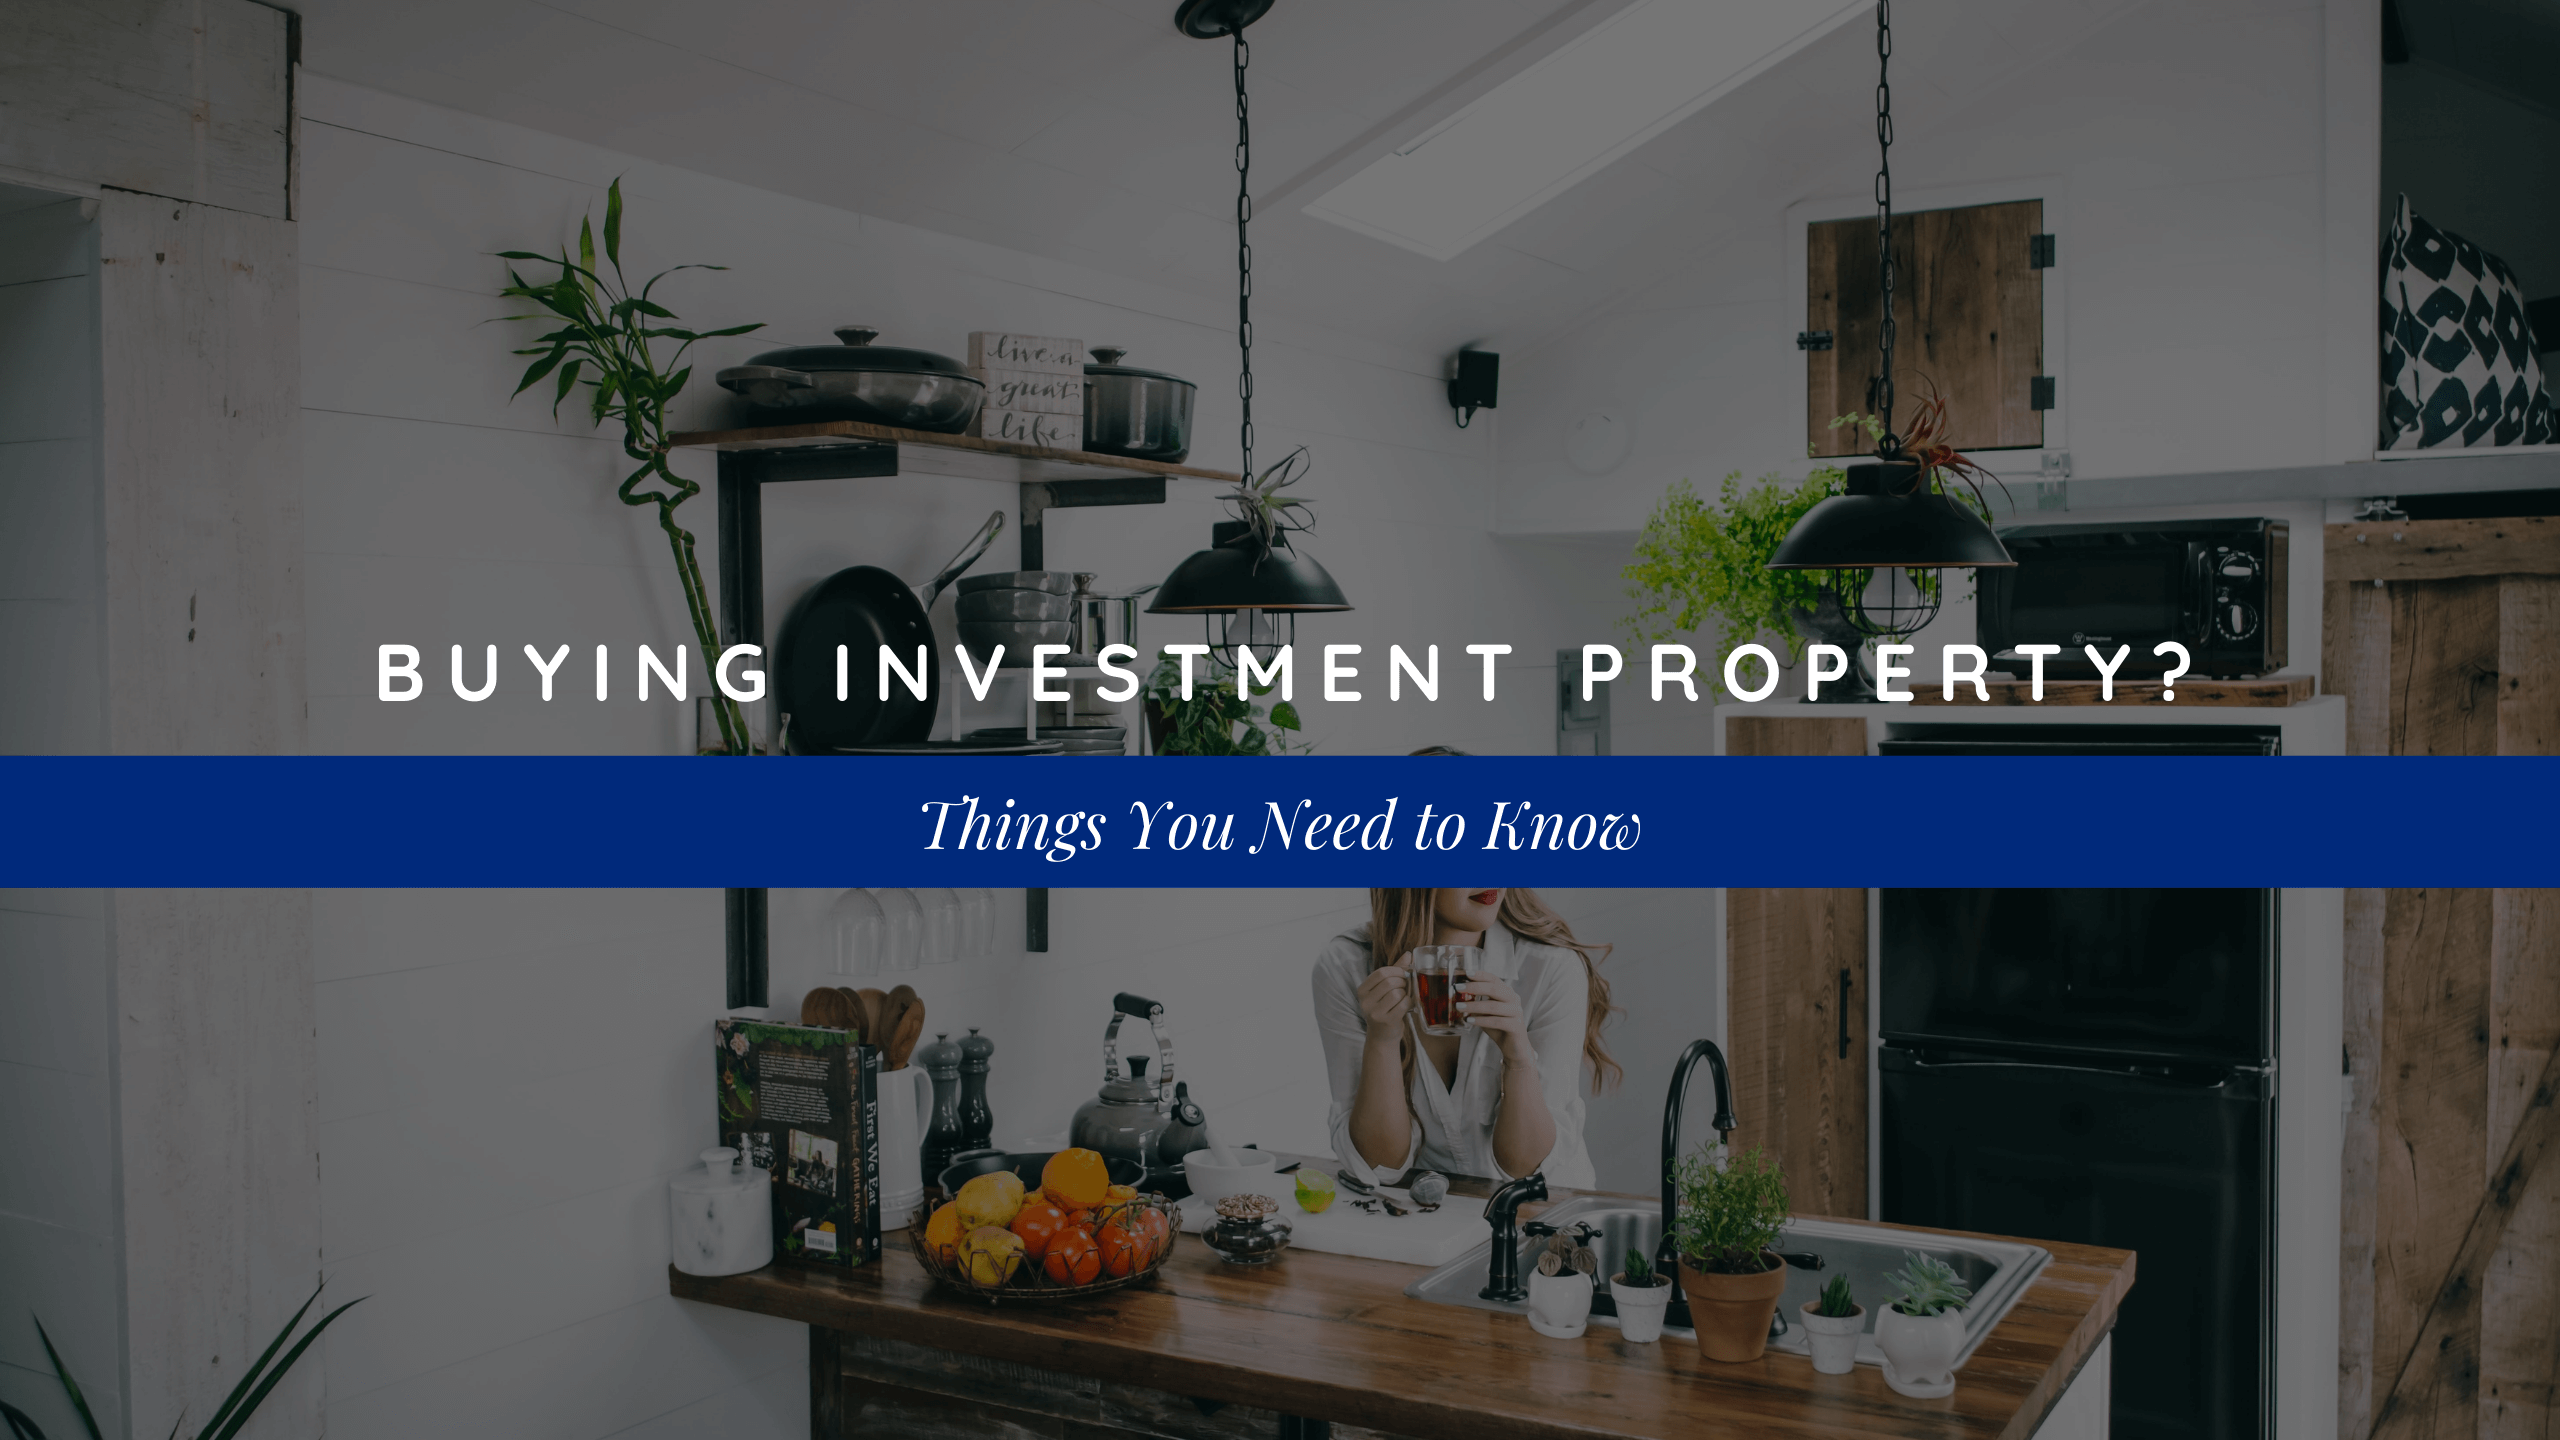 Buying Investment Property? 3 Things You Need to Know - article banner